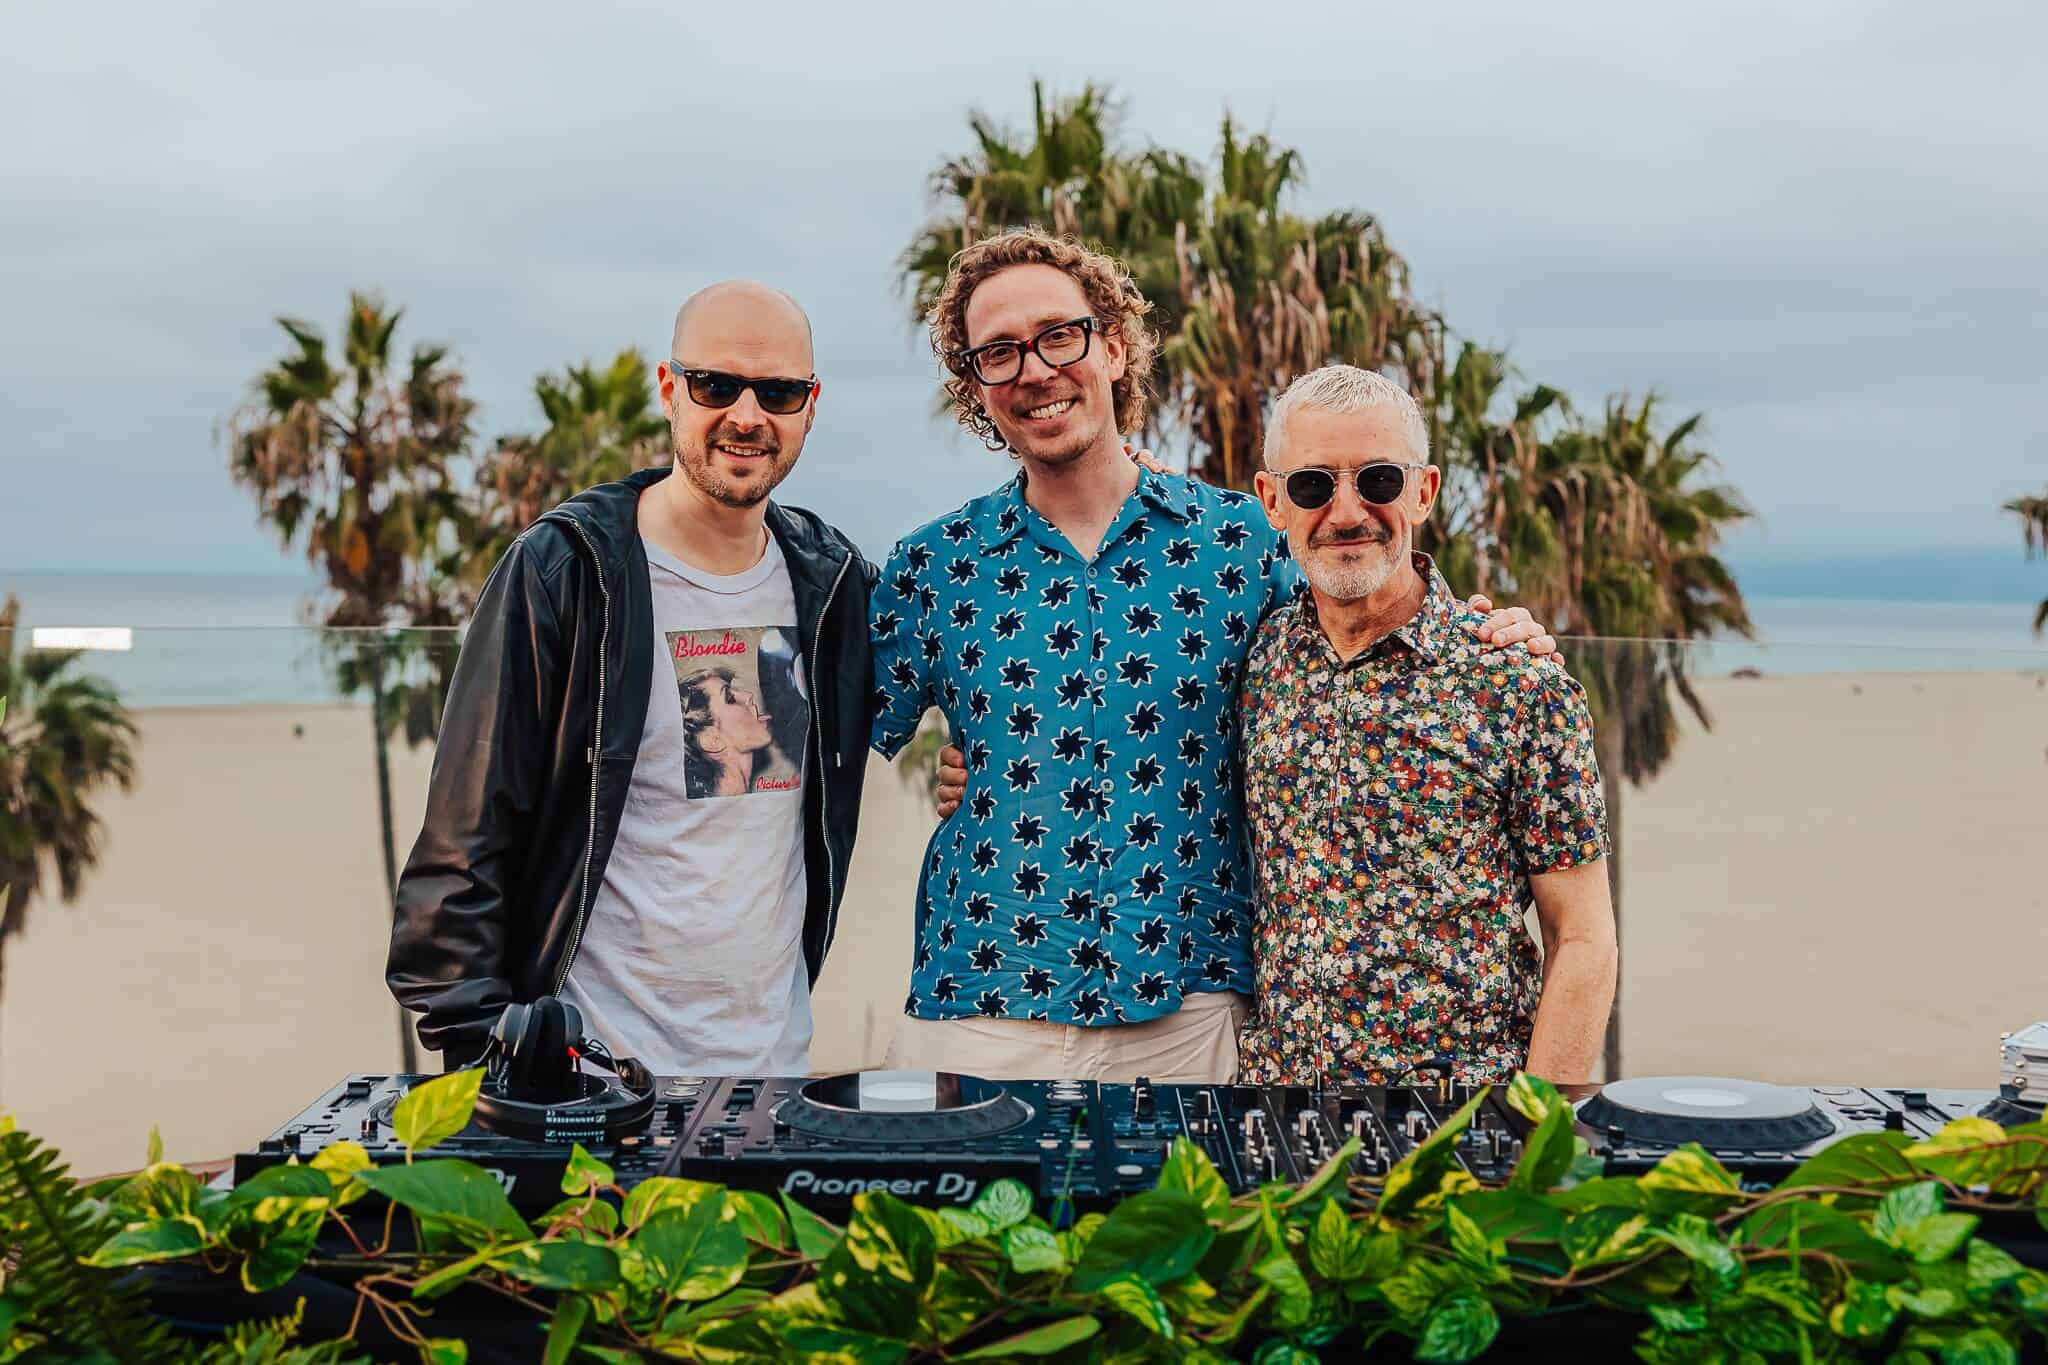 Above & Beyond Achieve RIAA Gold Certification with ‘Don’t Leave’ from acclaimed Album ‘Don’t Leave’